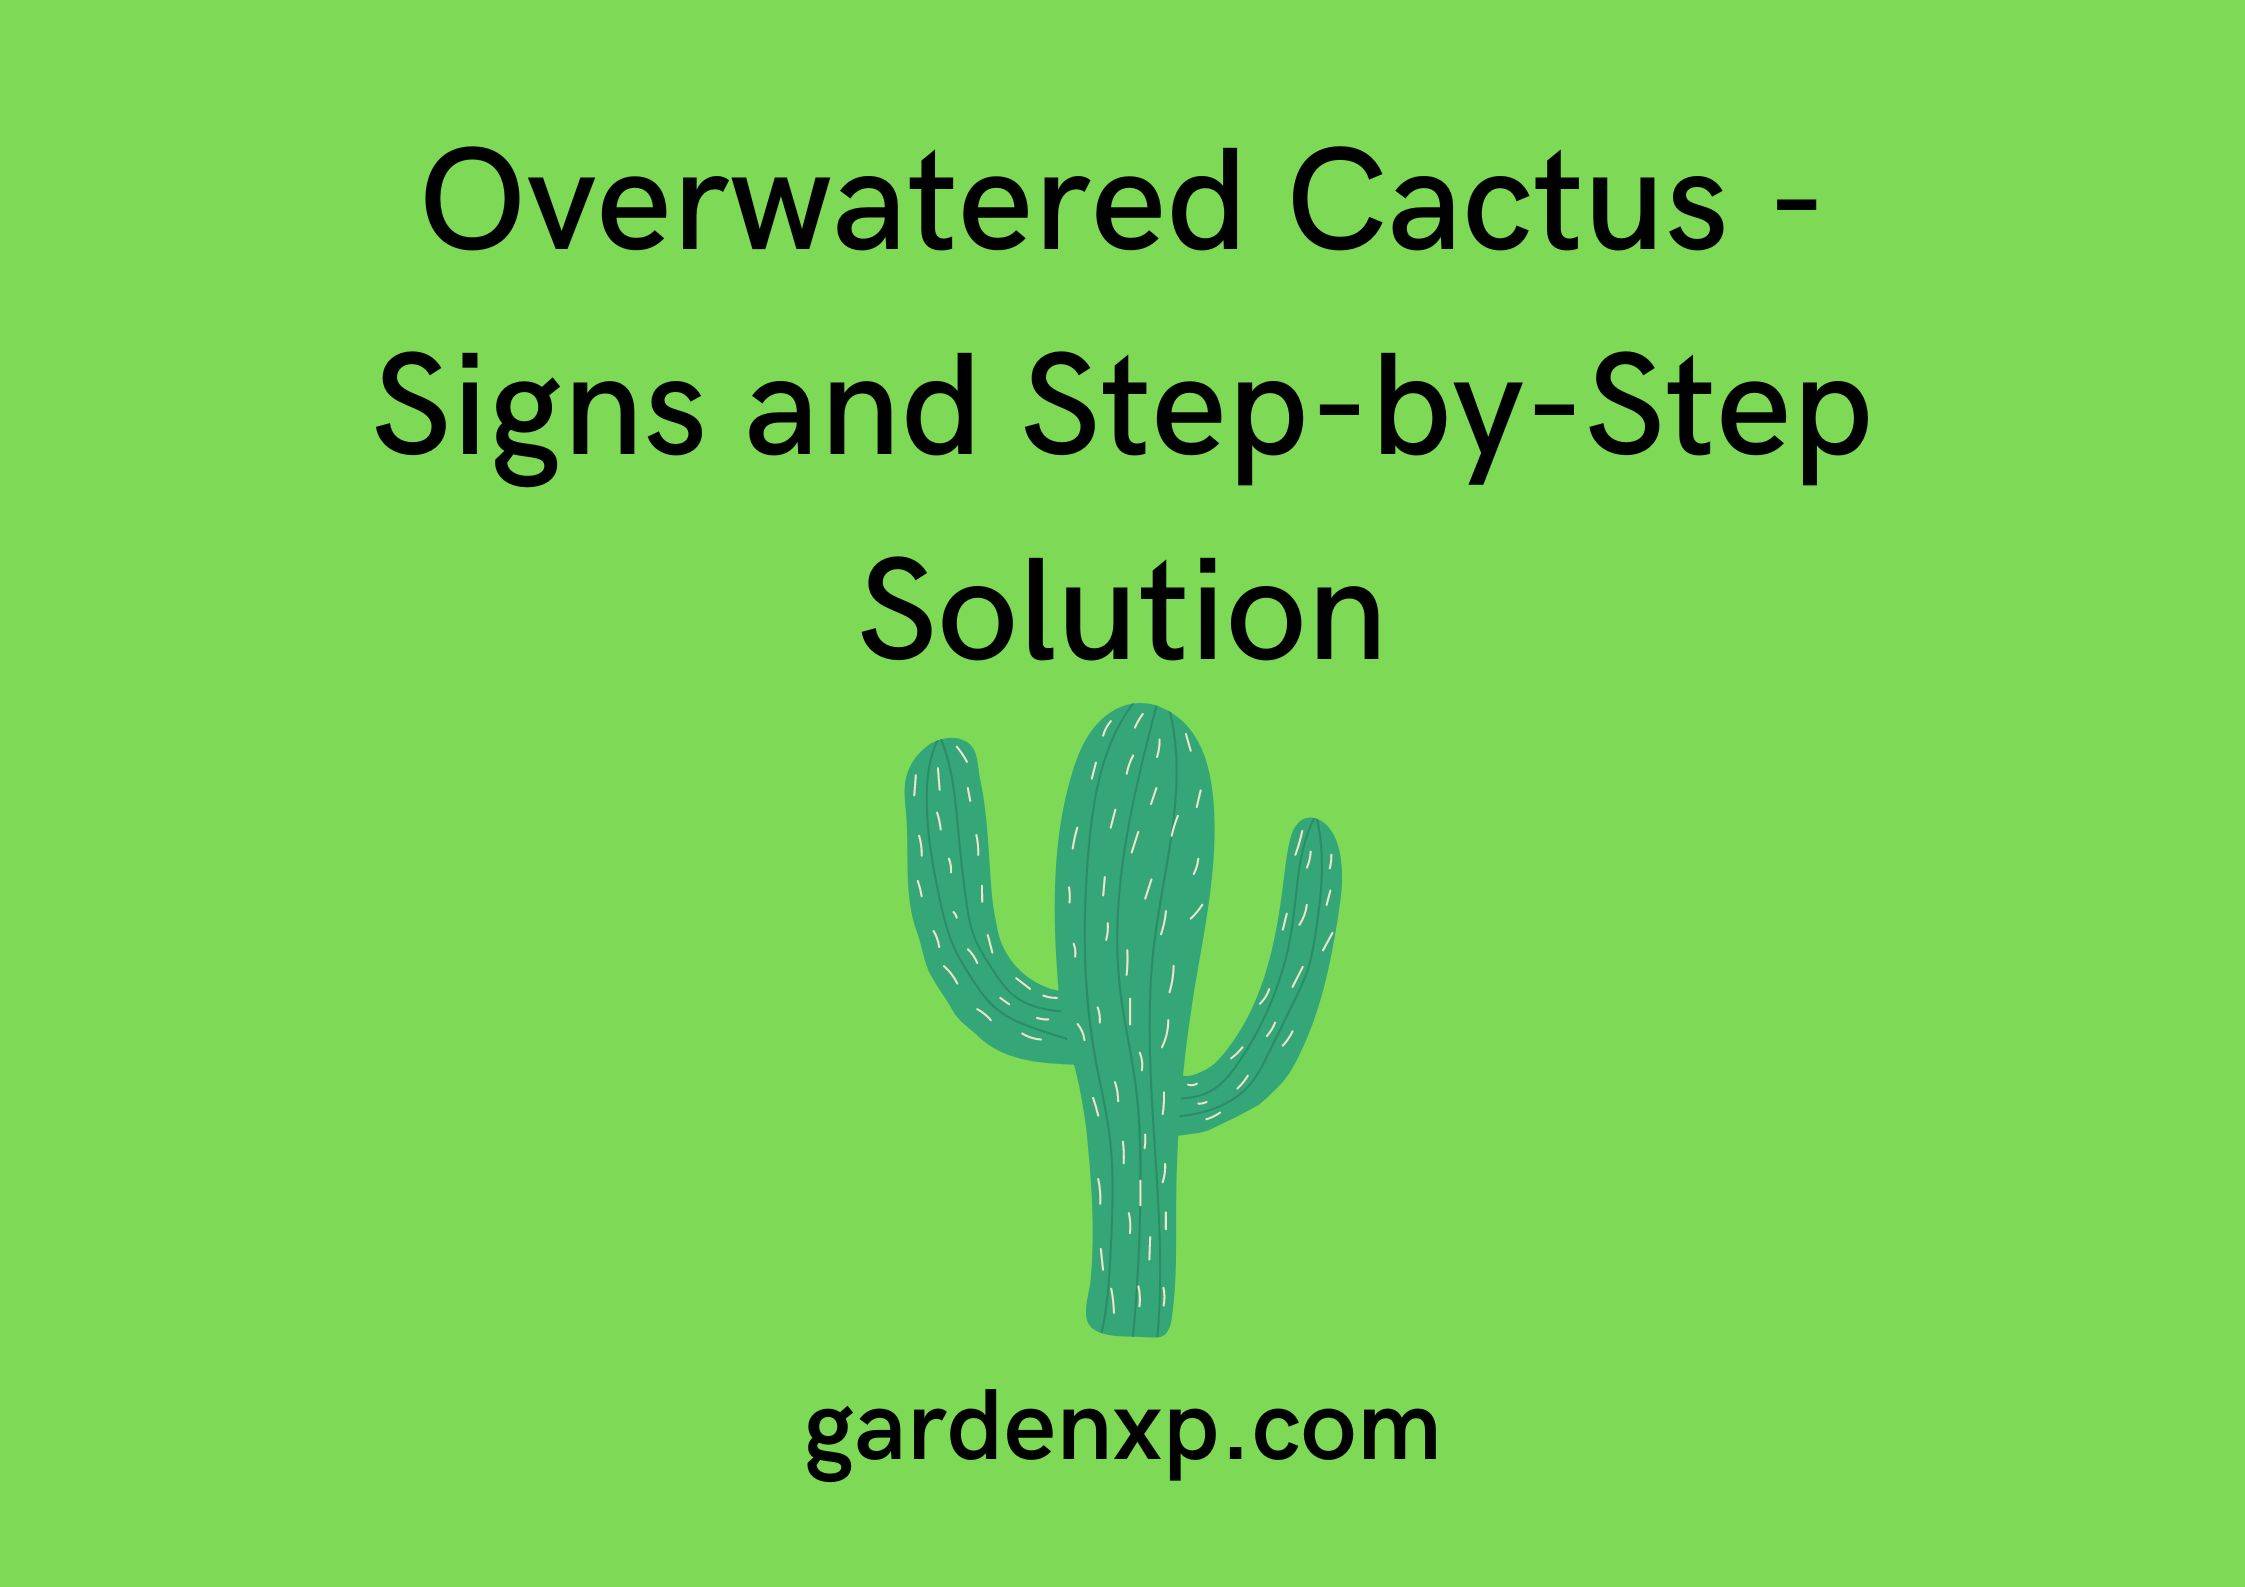 Overwatered Cactus - Signs and Step-by-Step Solution